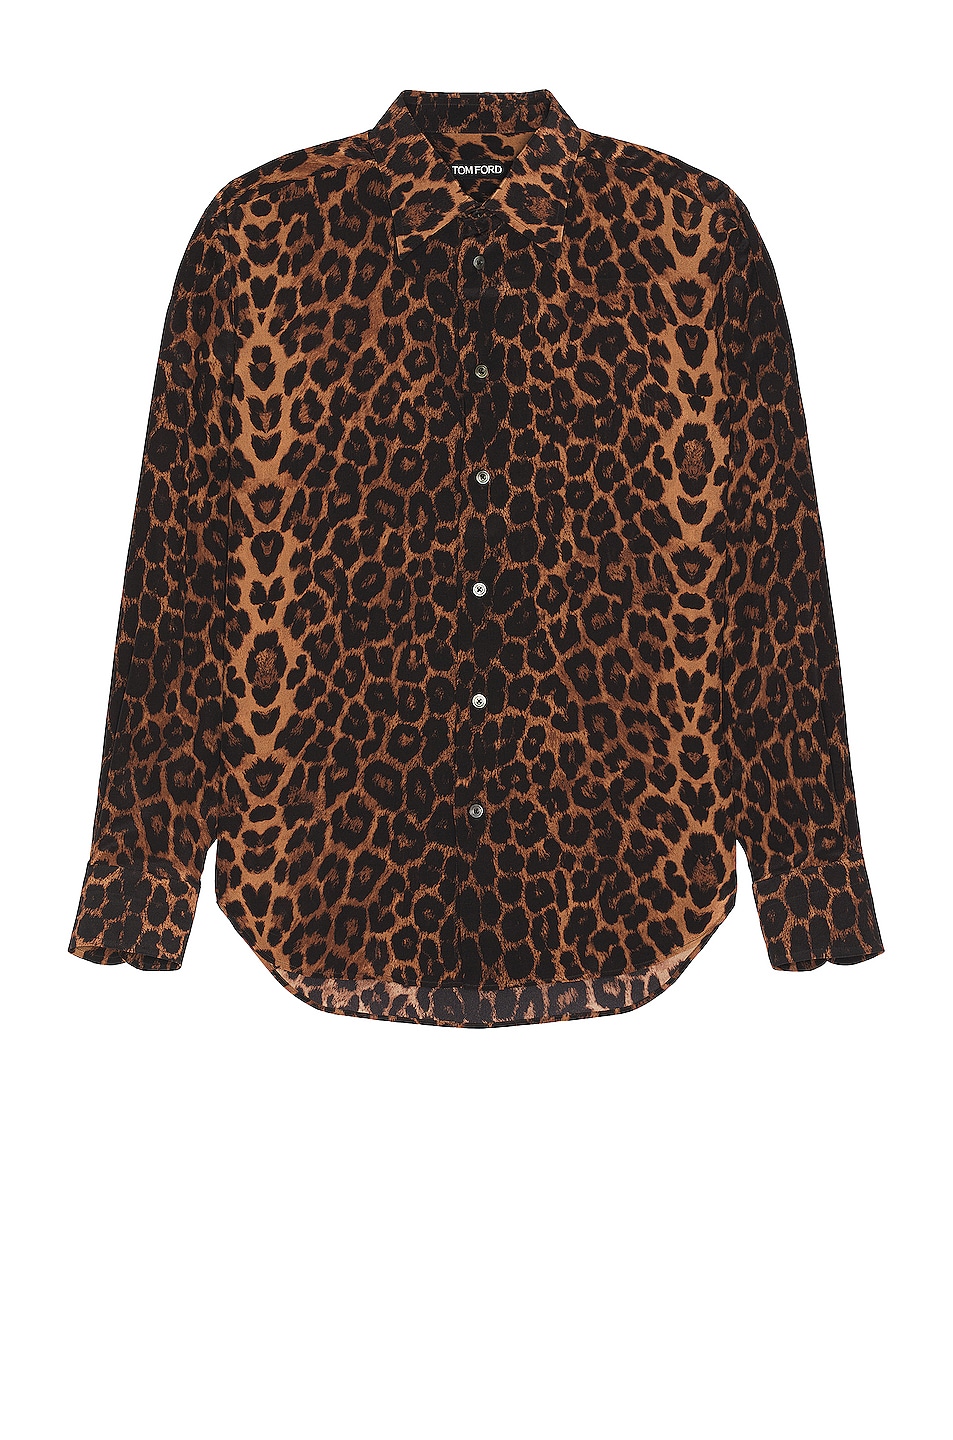 Image 1 of TOM FORD Fluid Fit Leisure Shirt in Leopard